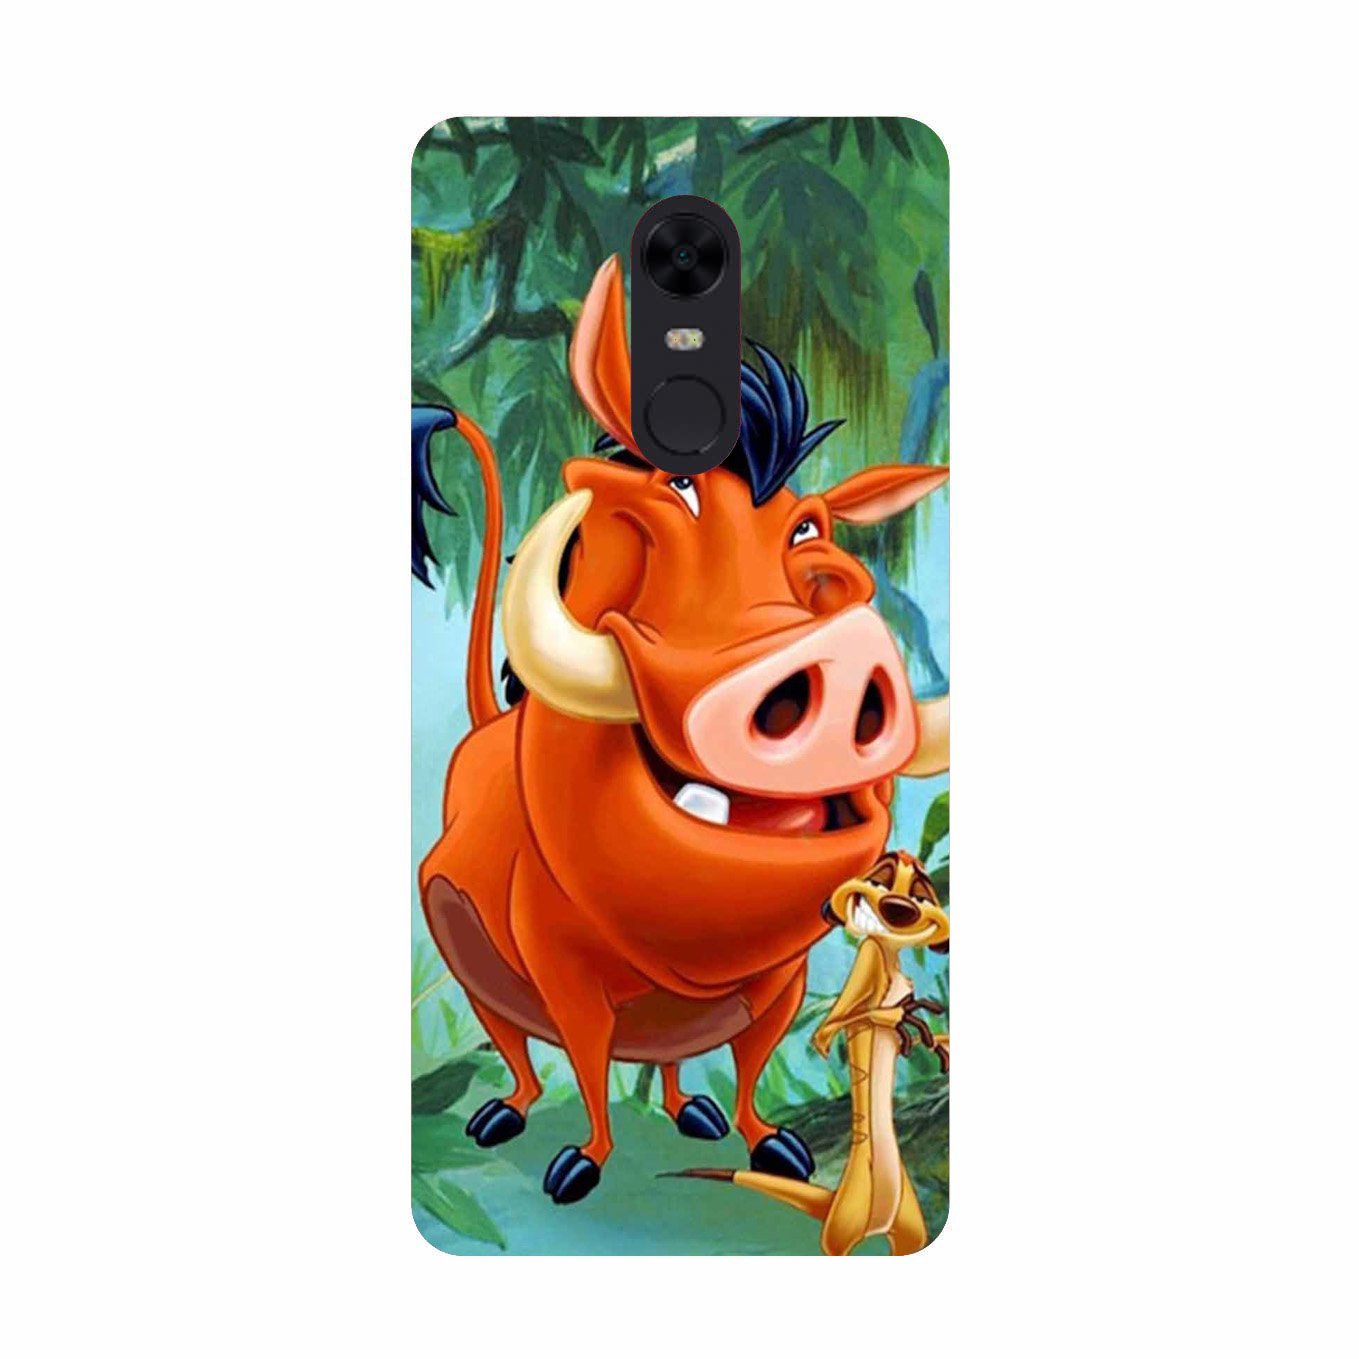 Timon and Pumbaa Mobile Back Case for Redmi 5  (Design - 305)